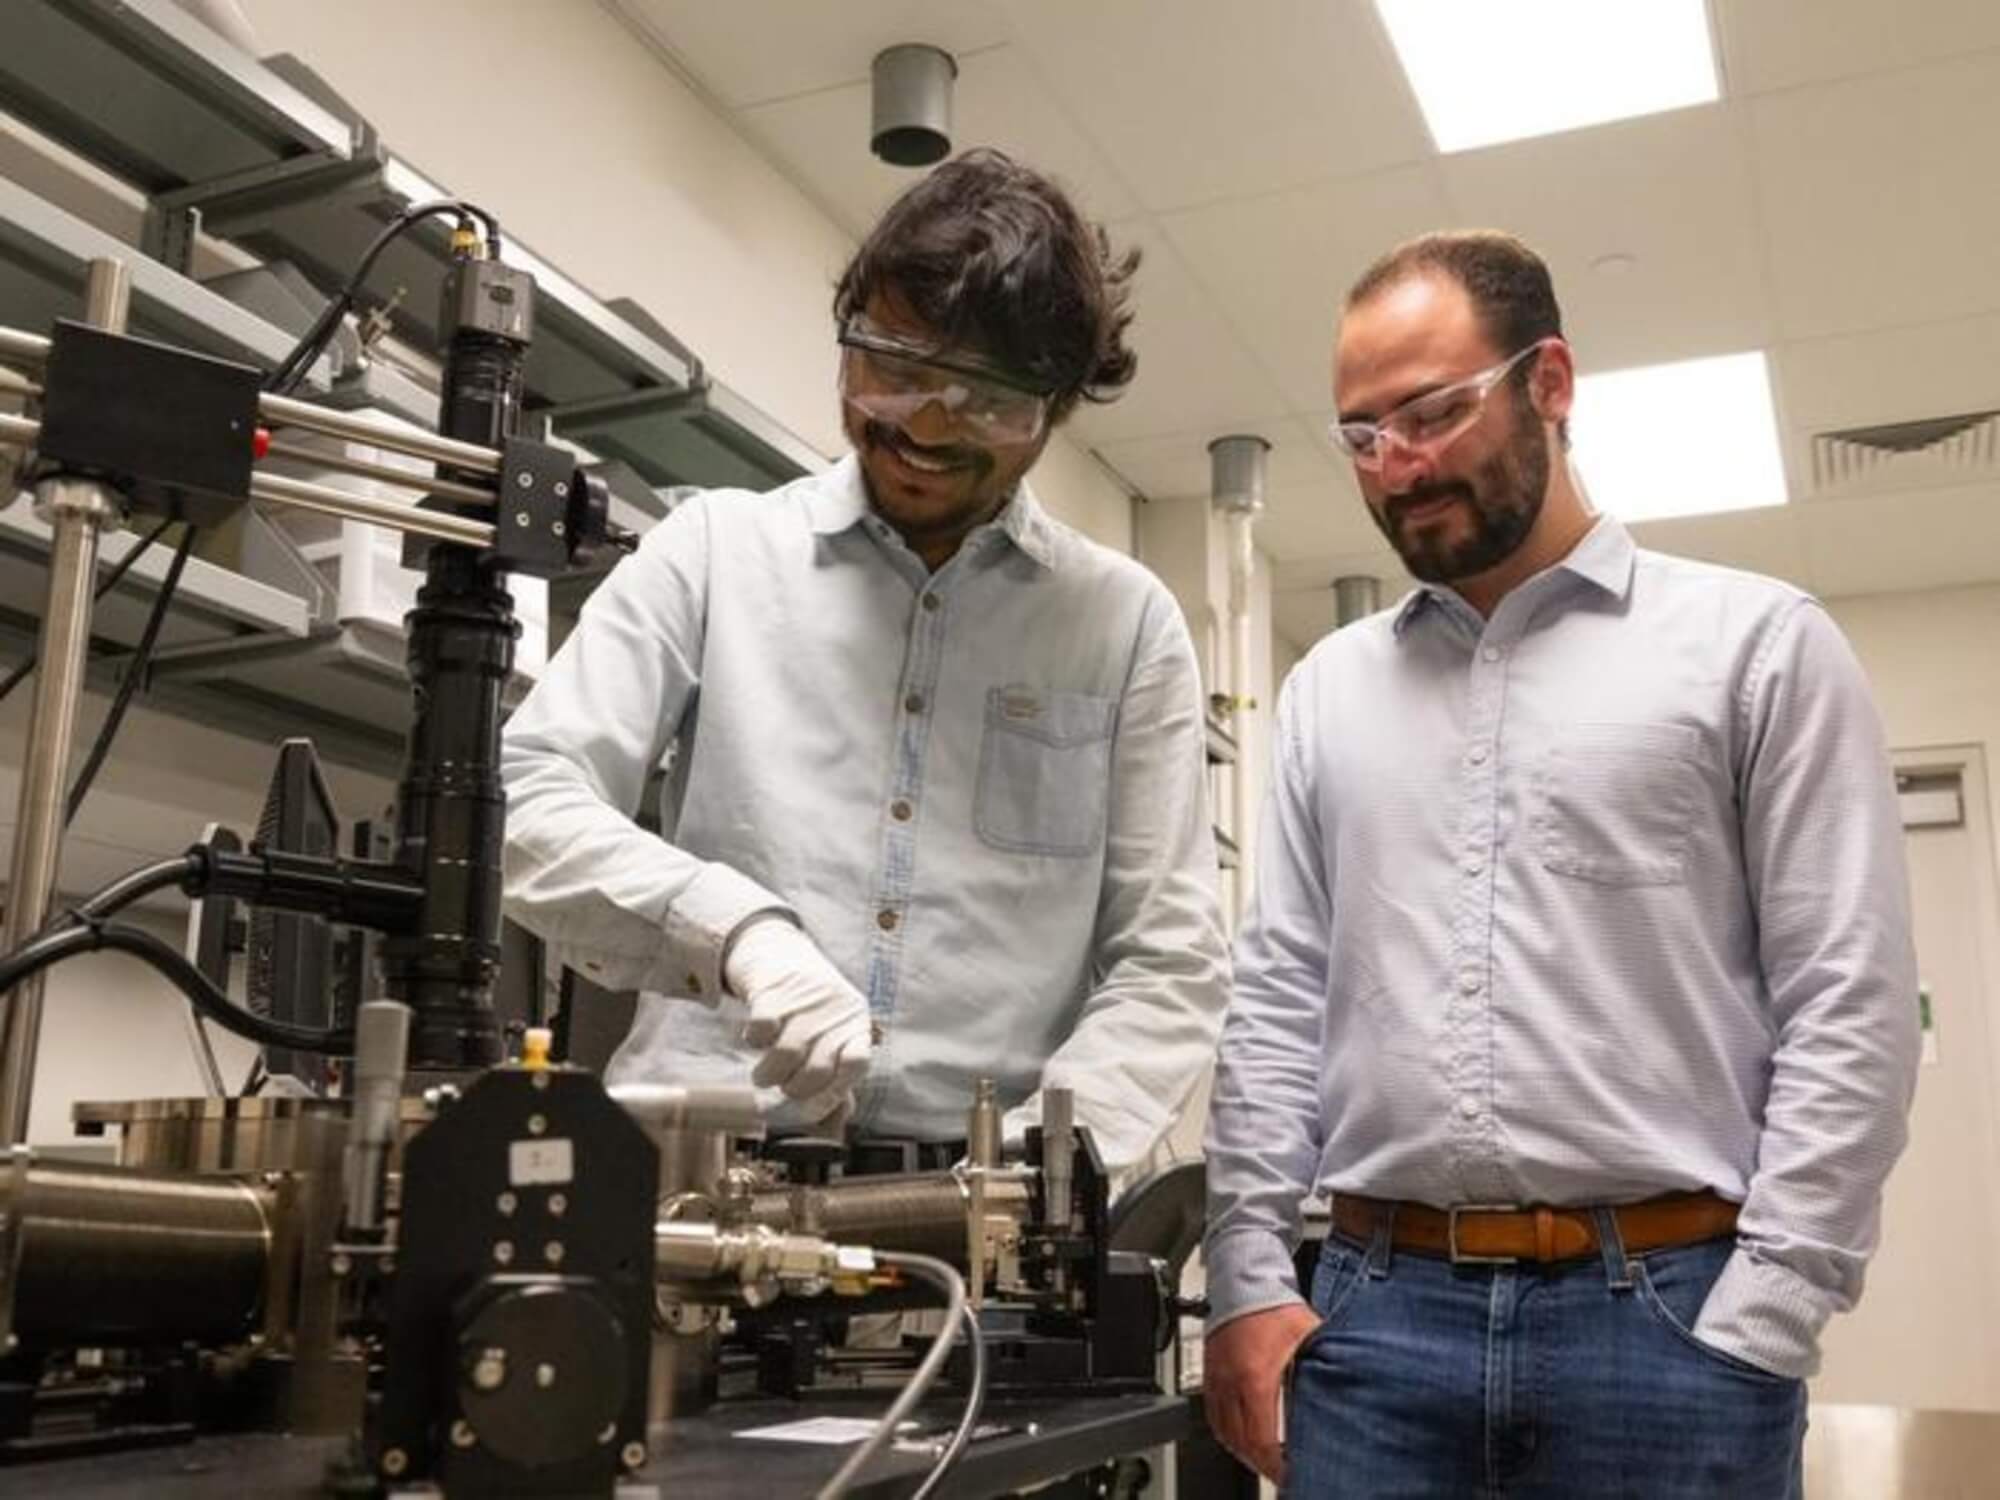 Subir Ghosh, doctoral student in engineering science and mechanics, left, and Andrew Pannone, graduate research assistant in engineering science and mechanics, at work in a lab in the Millennium Science Complex on Penn State's University Park campus